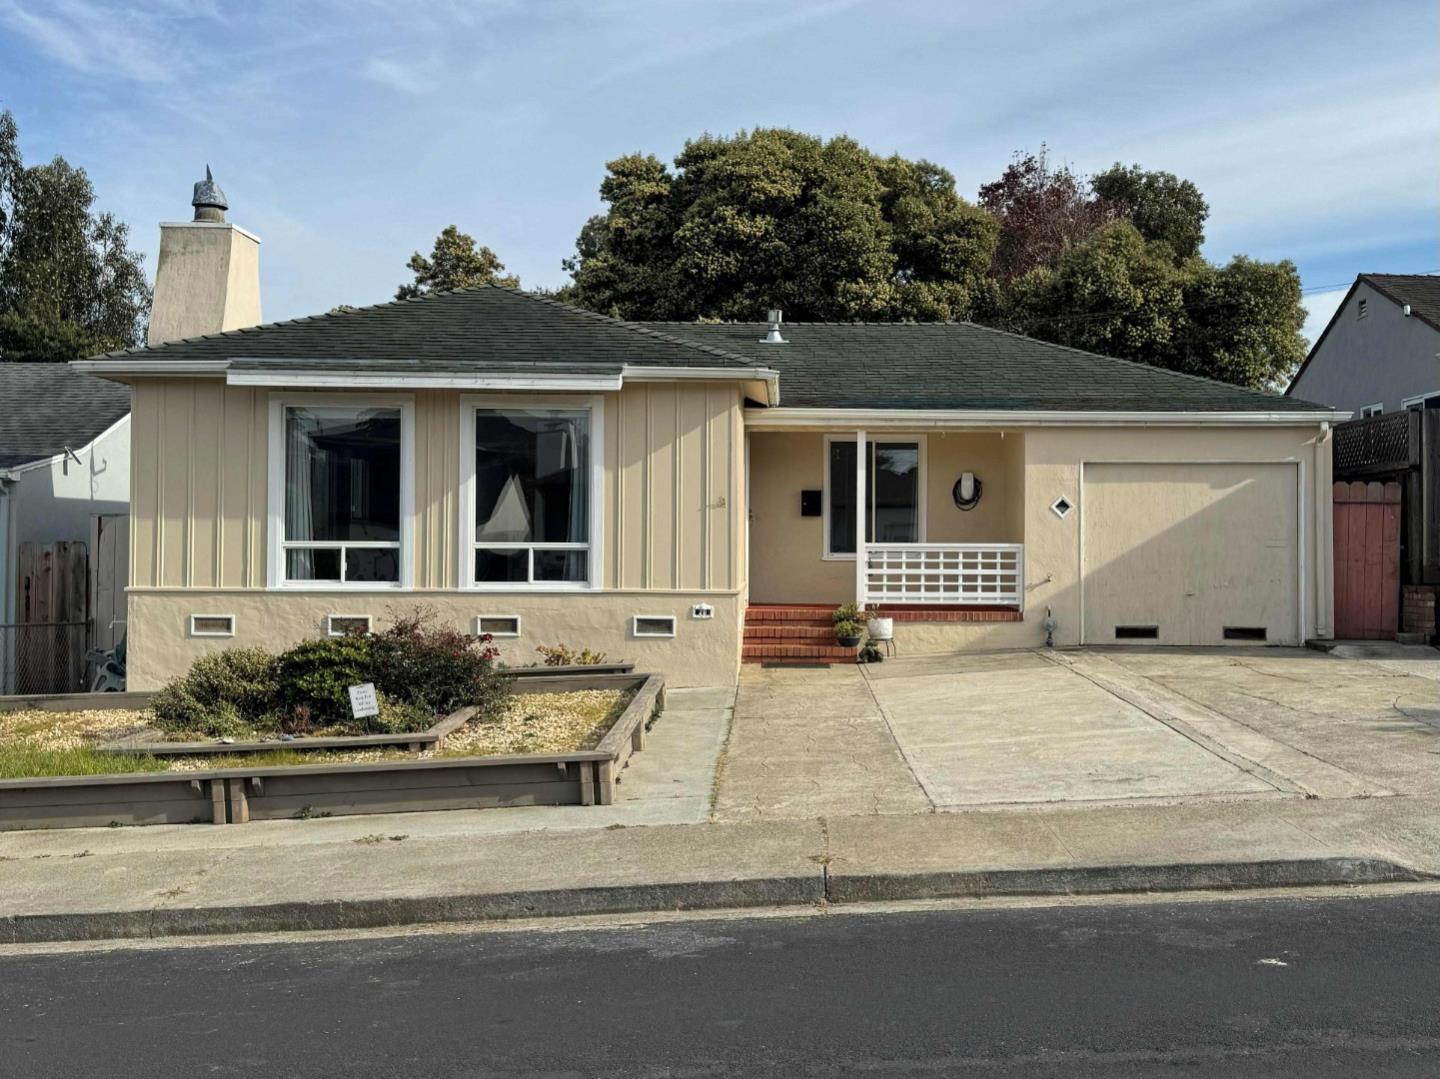 Photo of 20 Greenwood Dr in South San Francisco, CA